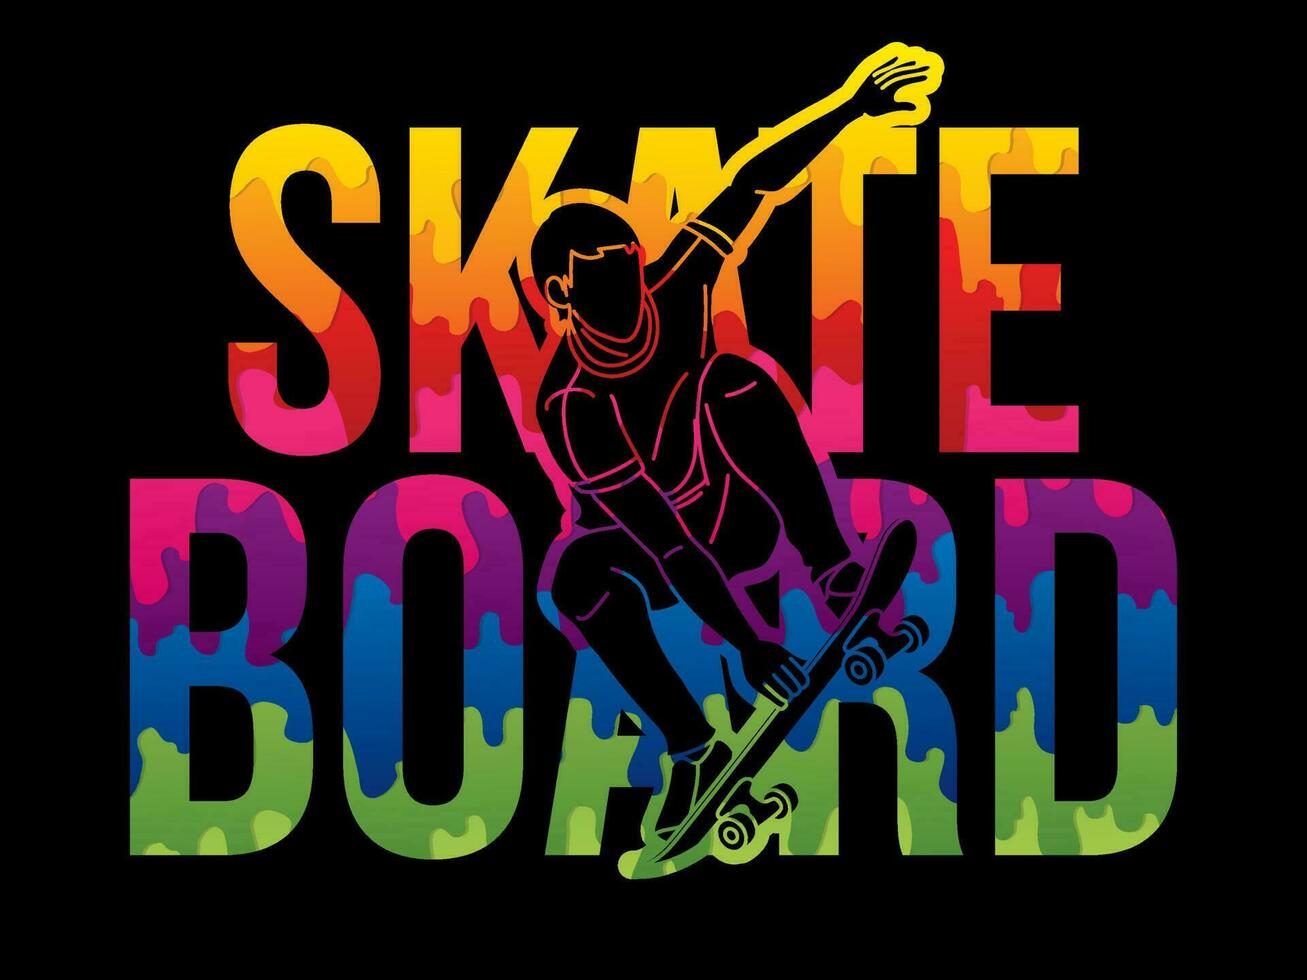 Skateboard and Skateboarder Action with Text vector